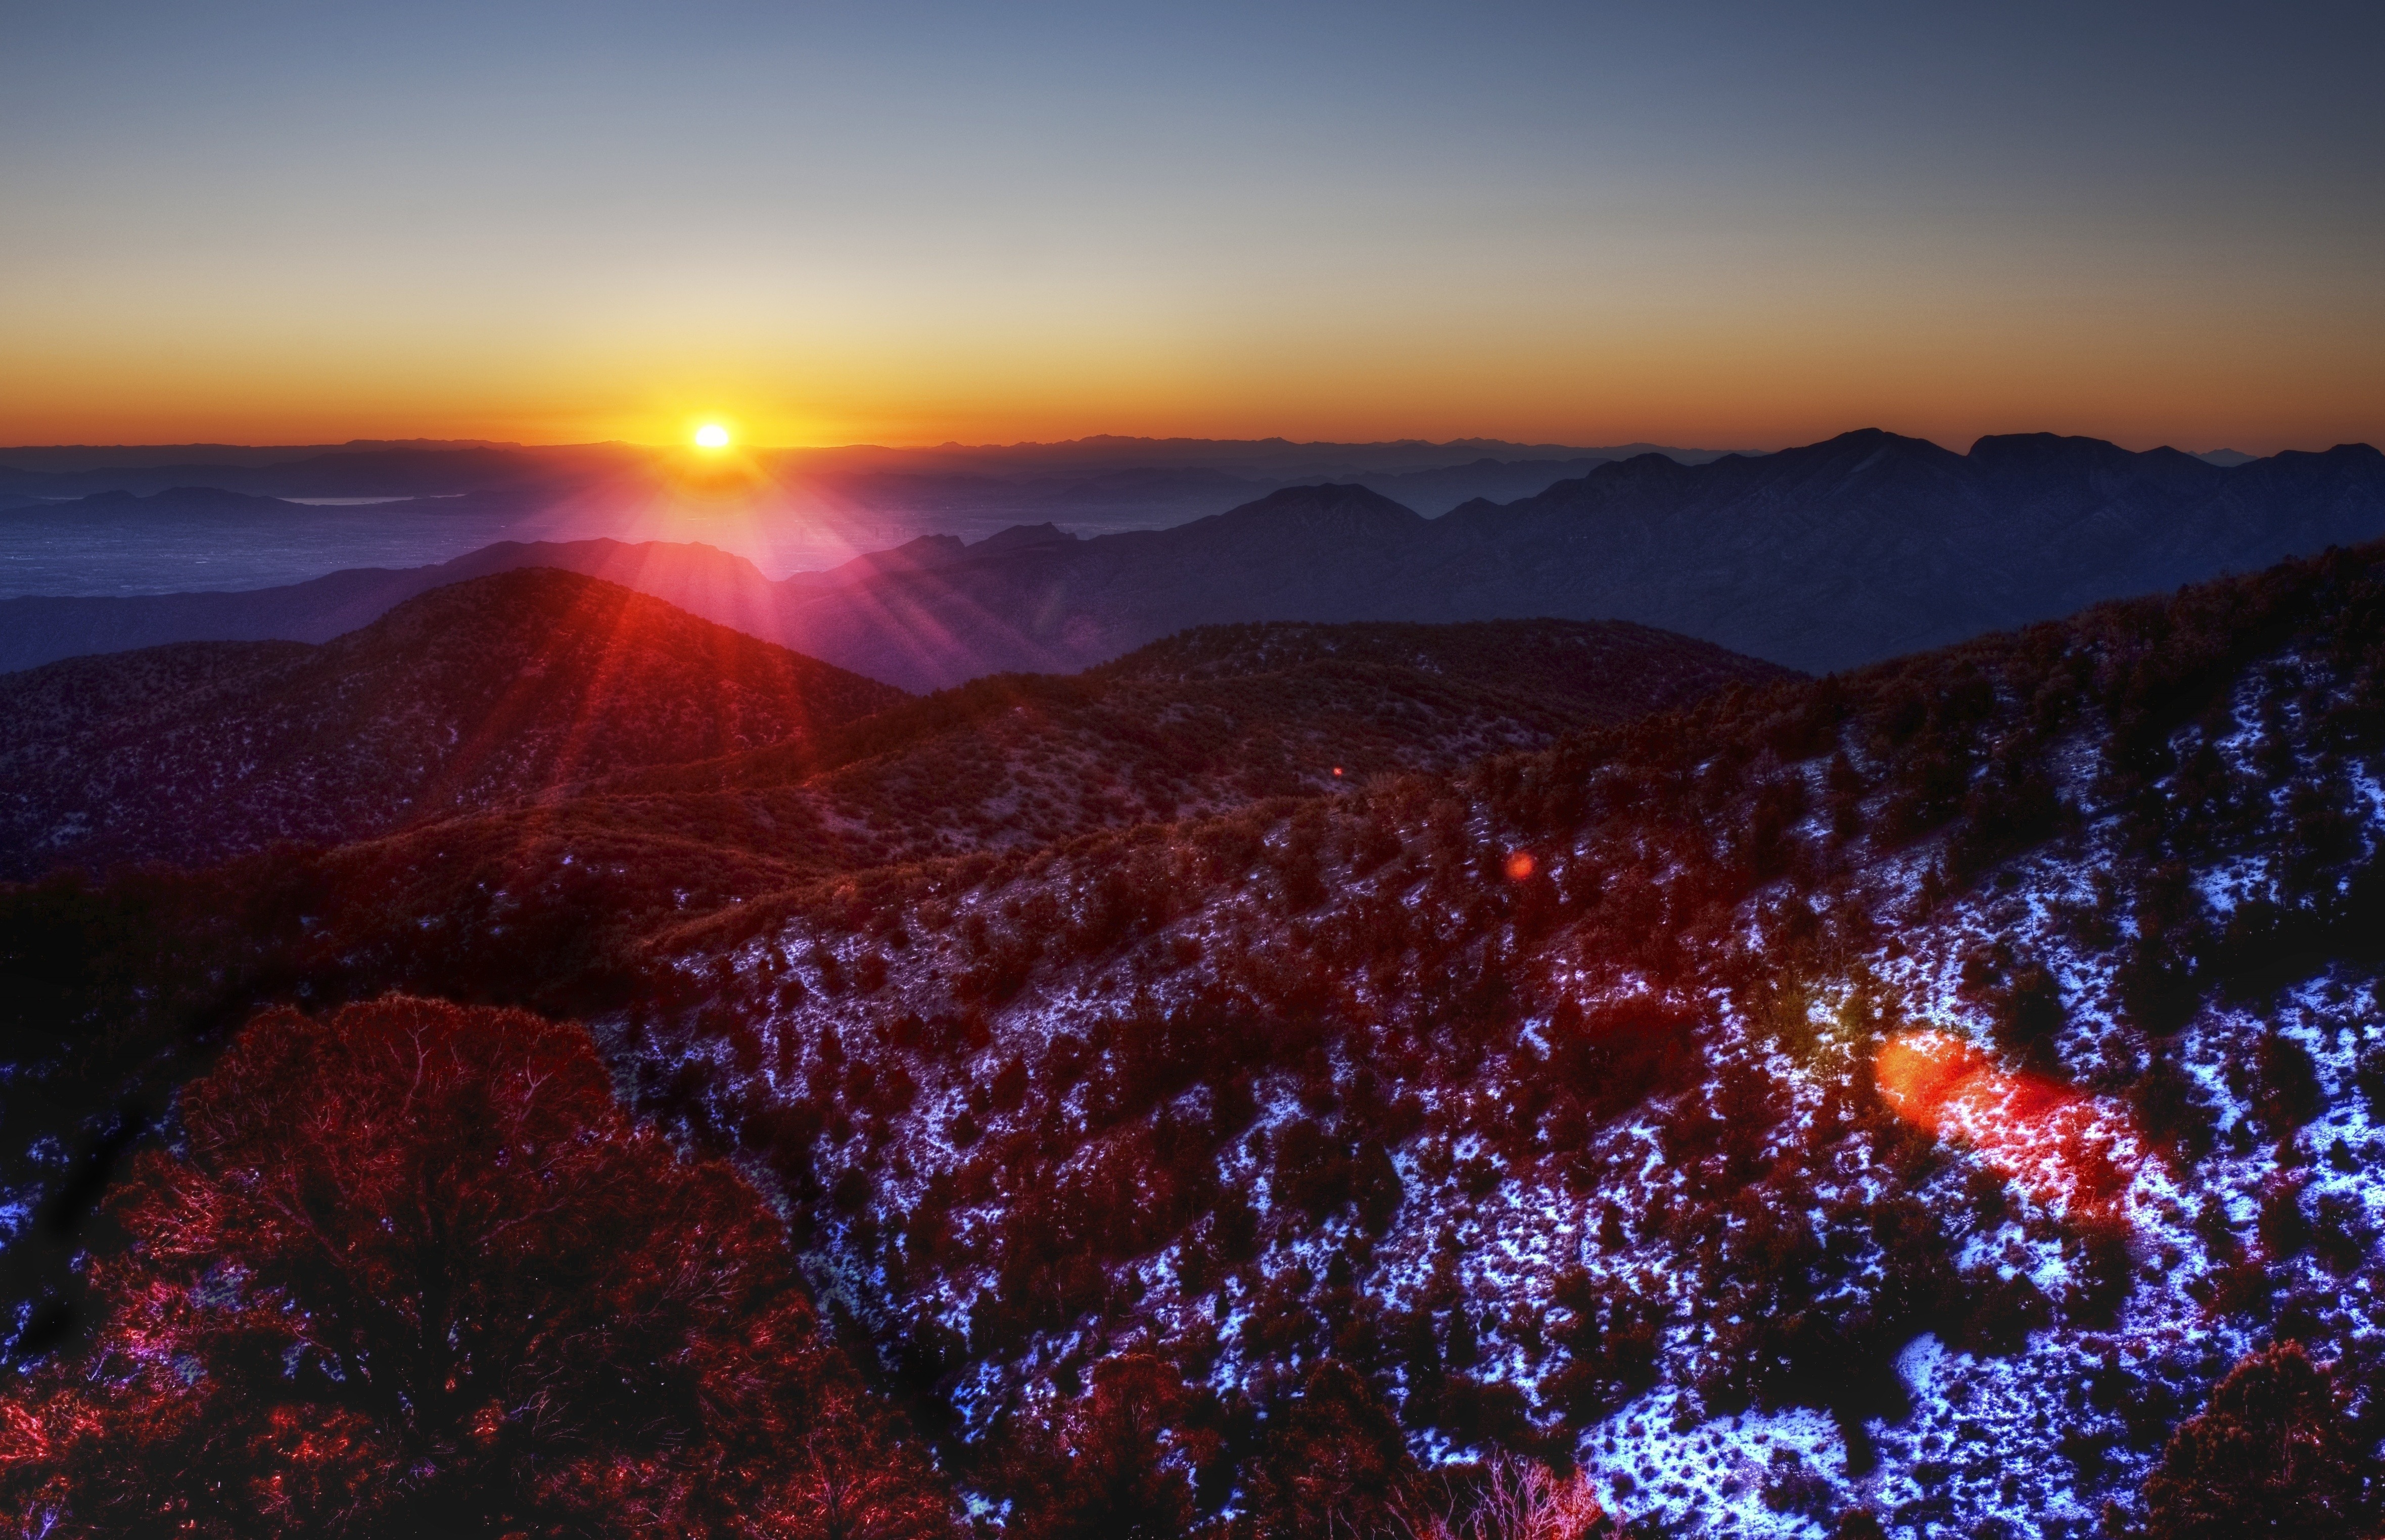 Wallpapers dawn mountains scenic on the desktop